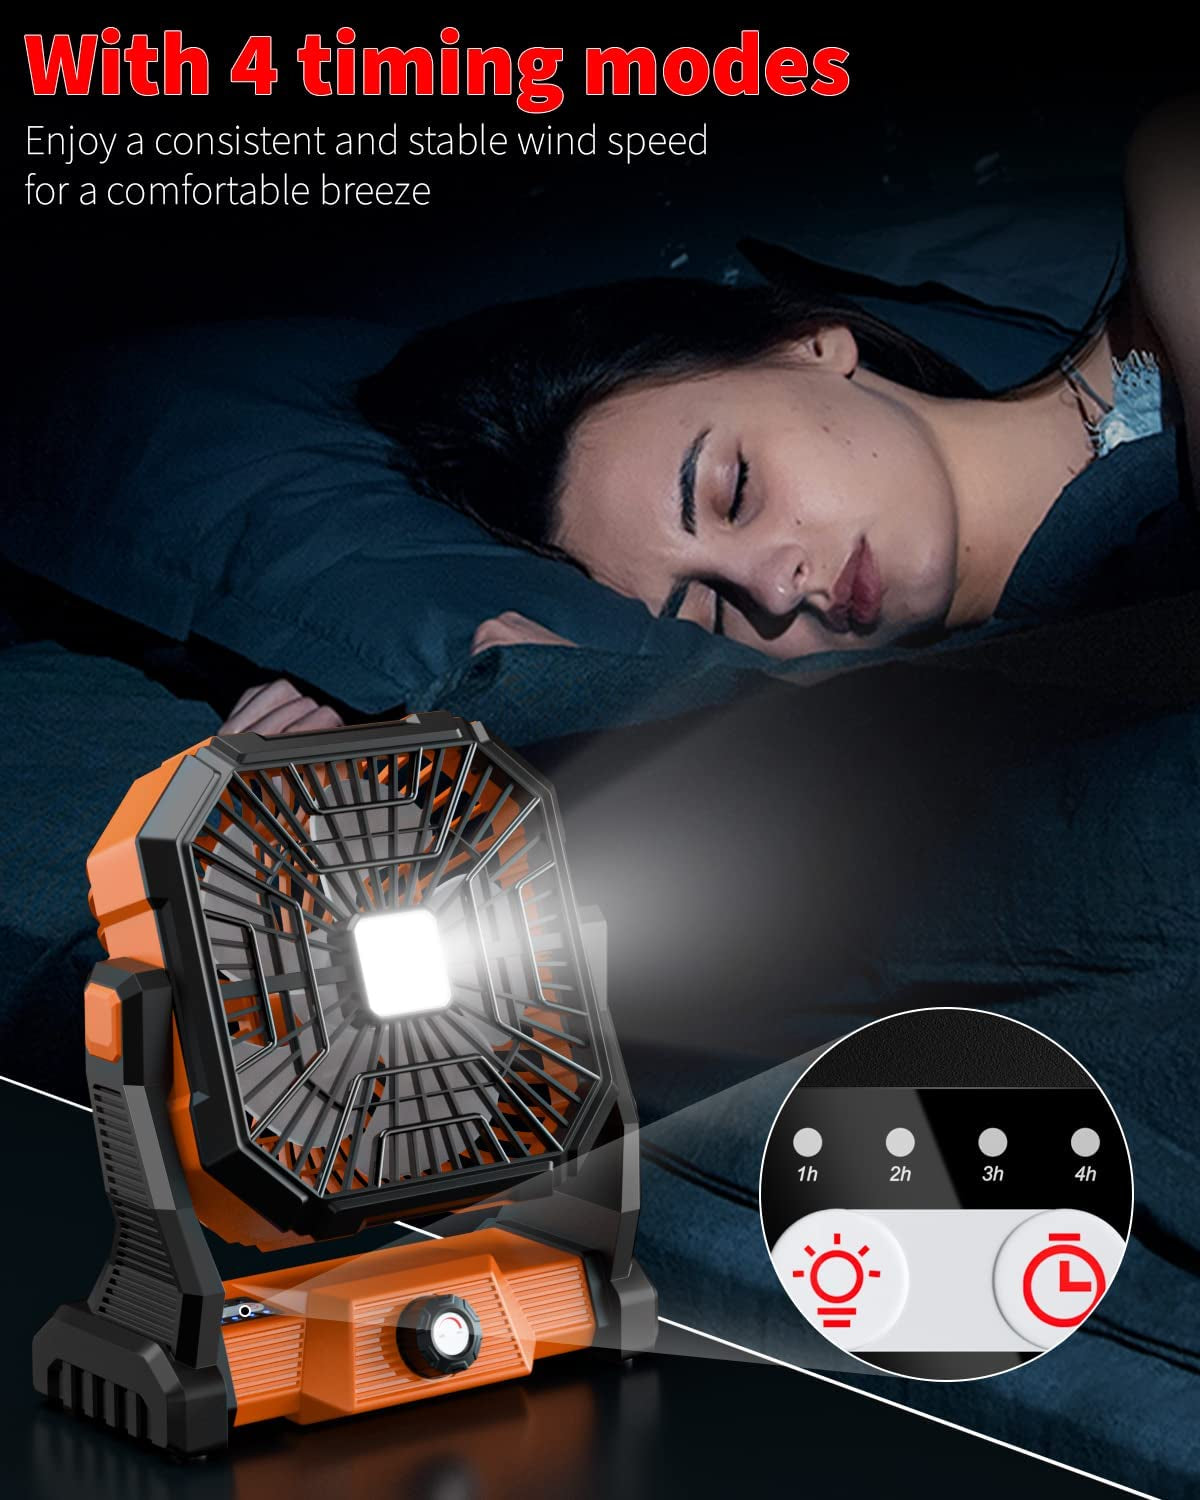 Rechargeable Camping Fan with LED Lantern, Portable and Versatile, USB Desk Fan with Hanging Hook, 20000mAh Battery, 270° Head Rotation,Travel, Camping, and Office, Orange